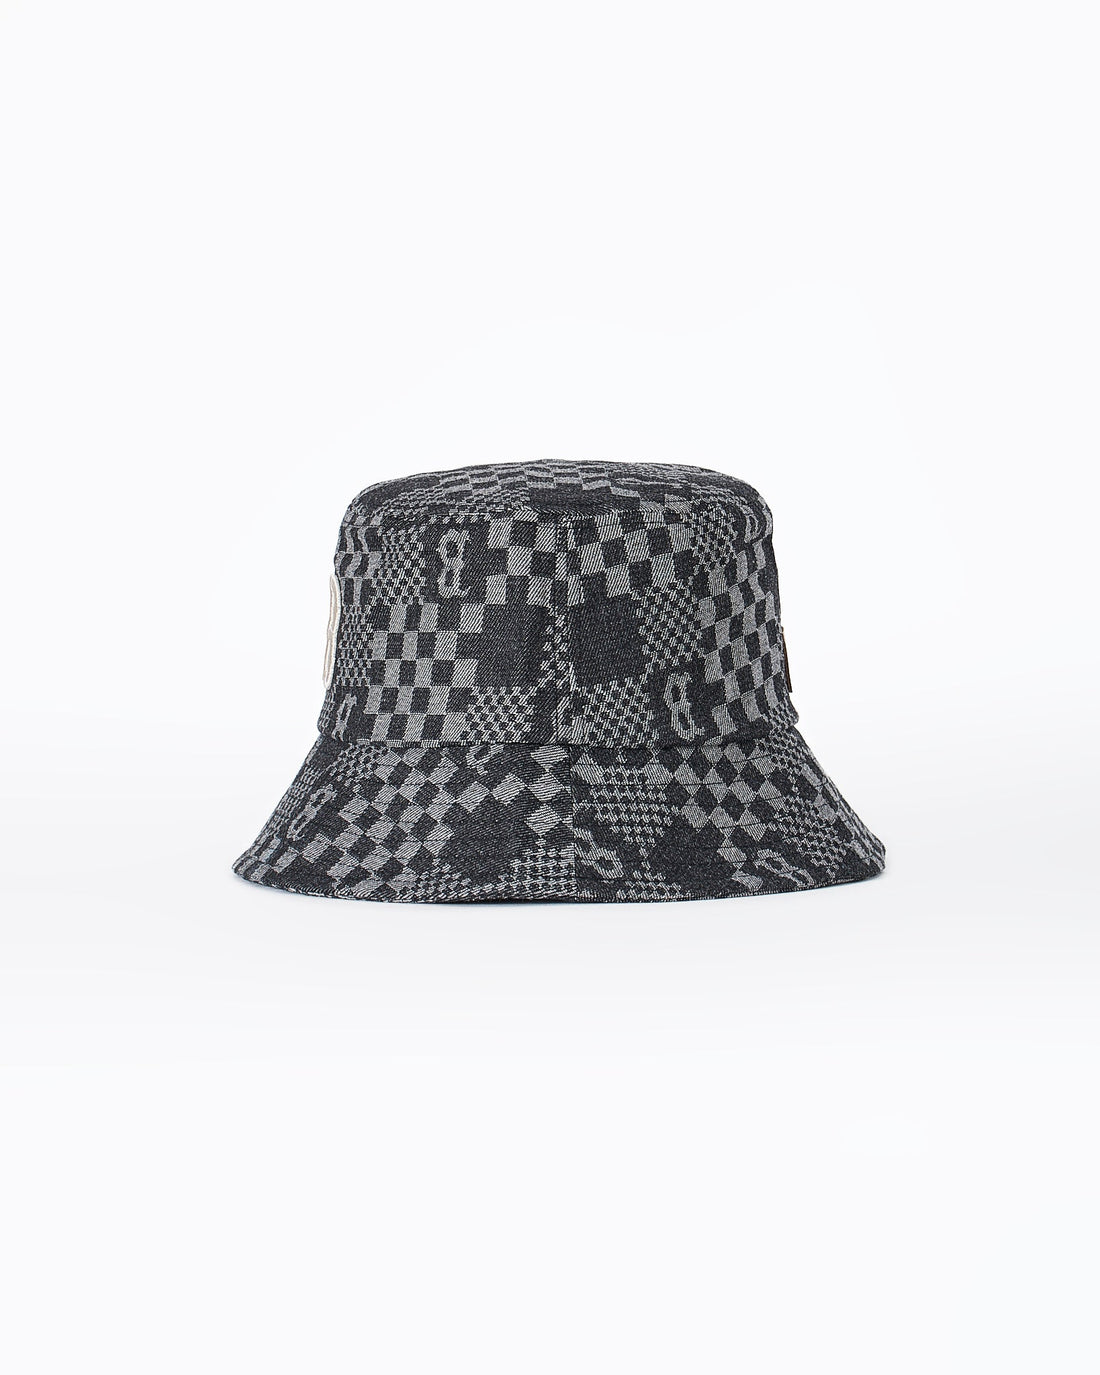 MOI OUTFIT-B Logo Embroidered Bucket Hat 12.90